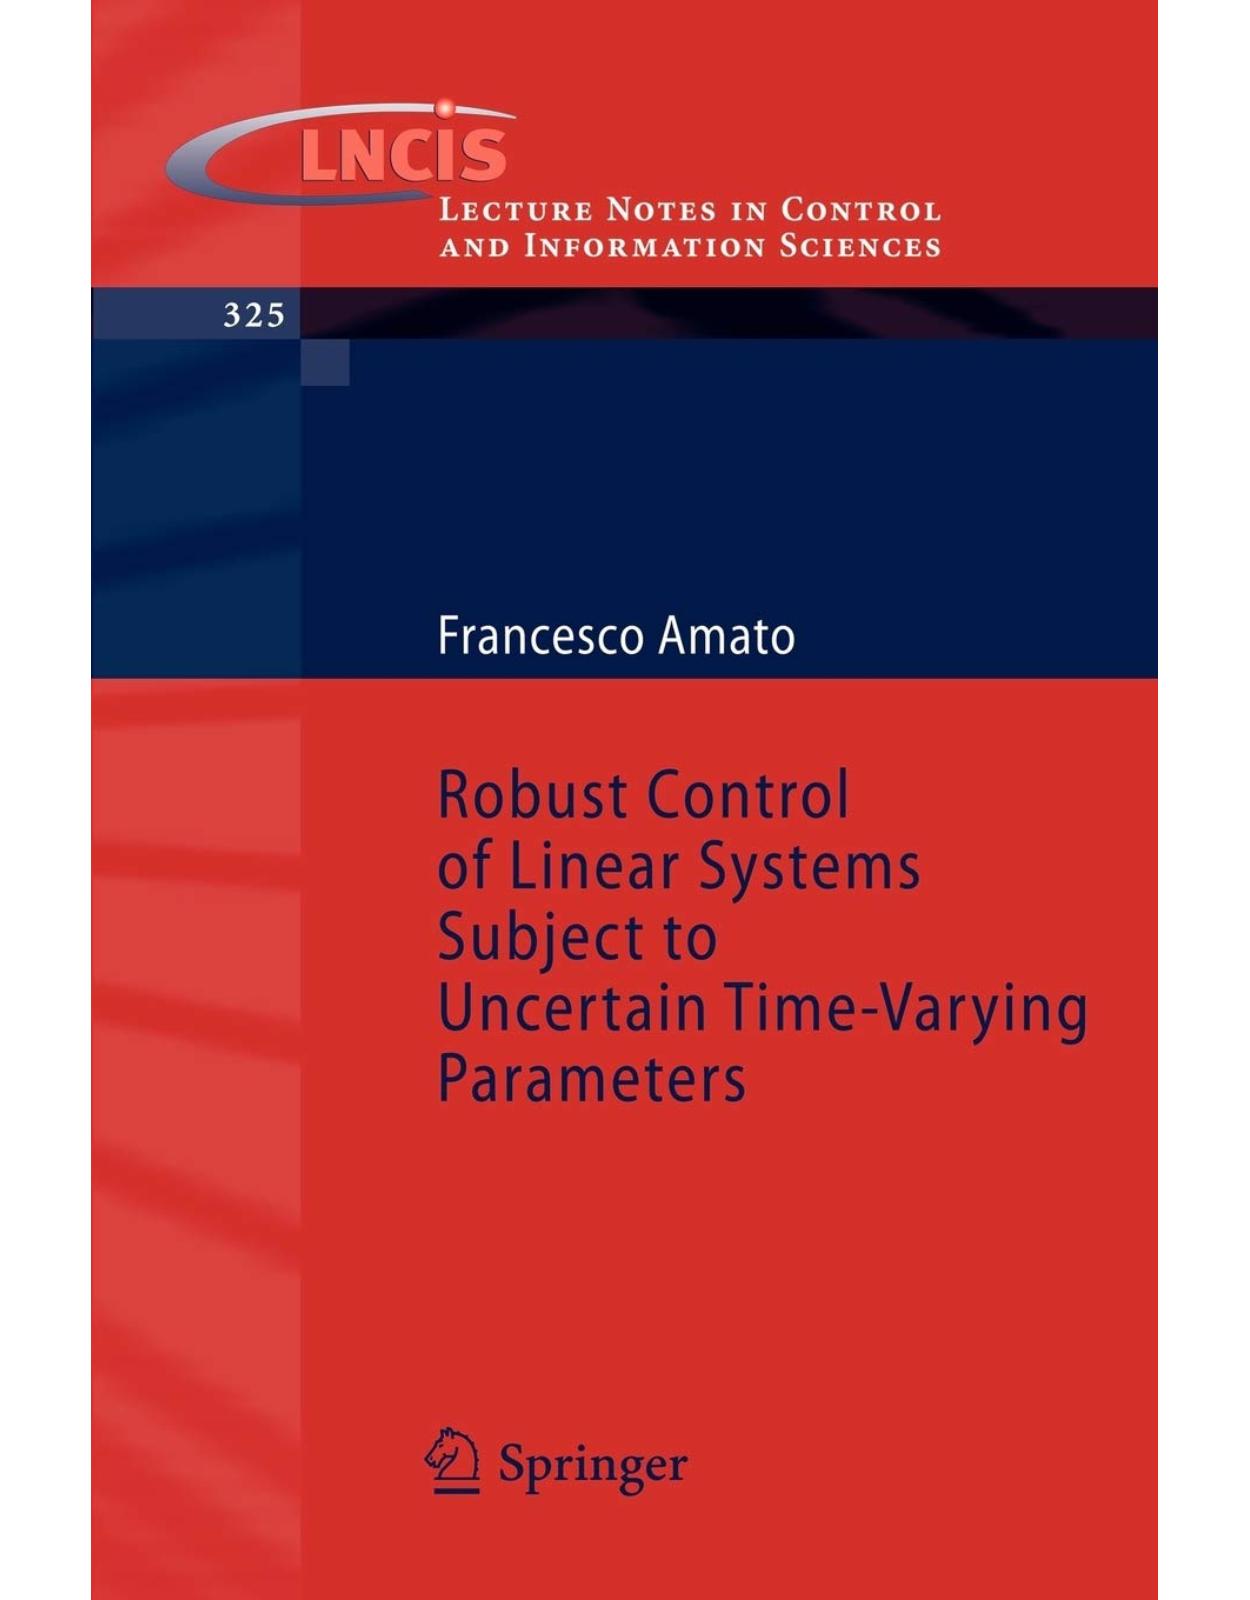 Robust Control of Linear Systems Subject to Uncertain Time-Varying Parameters